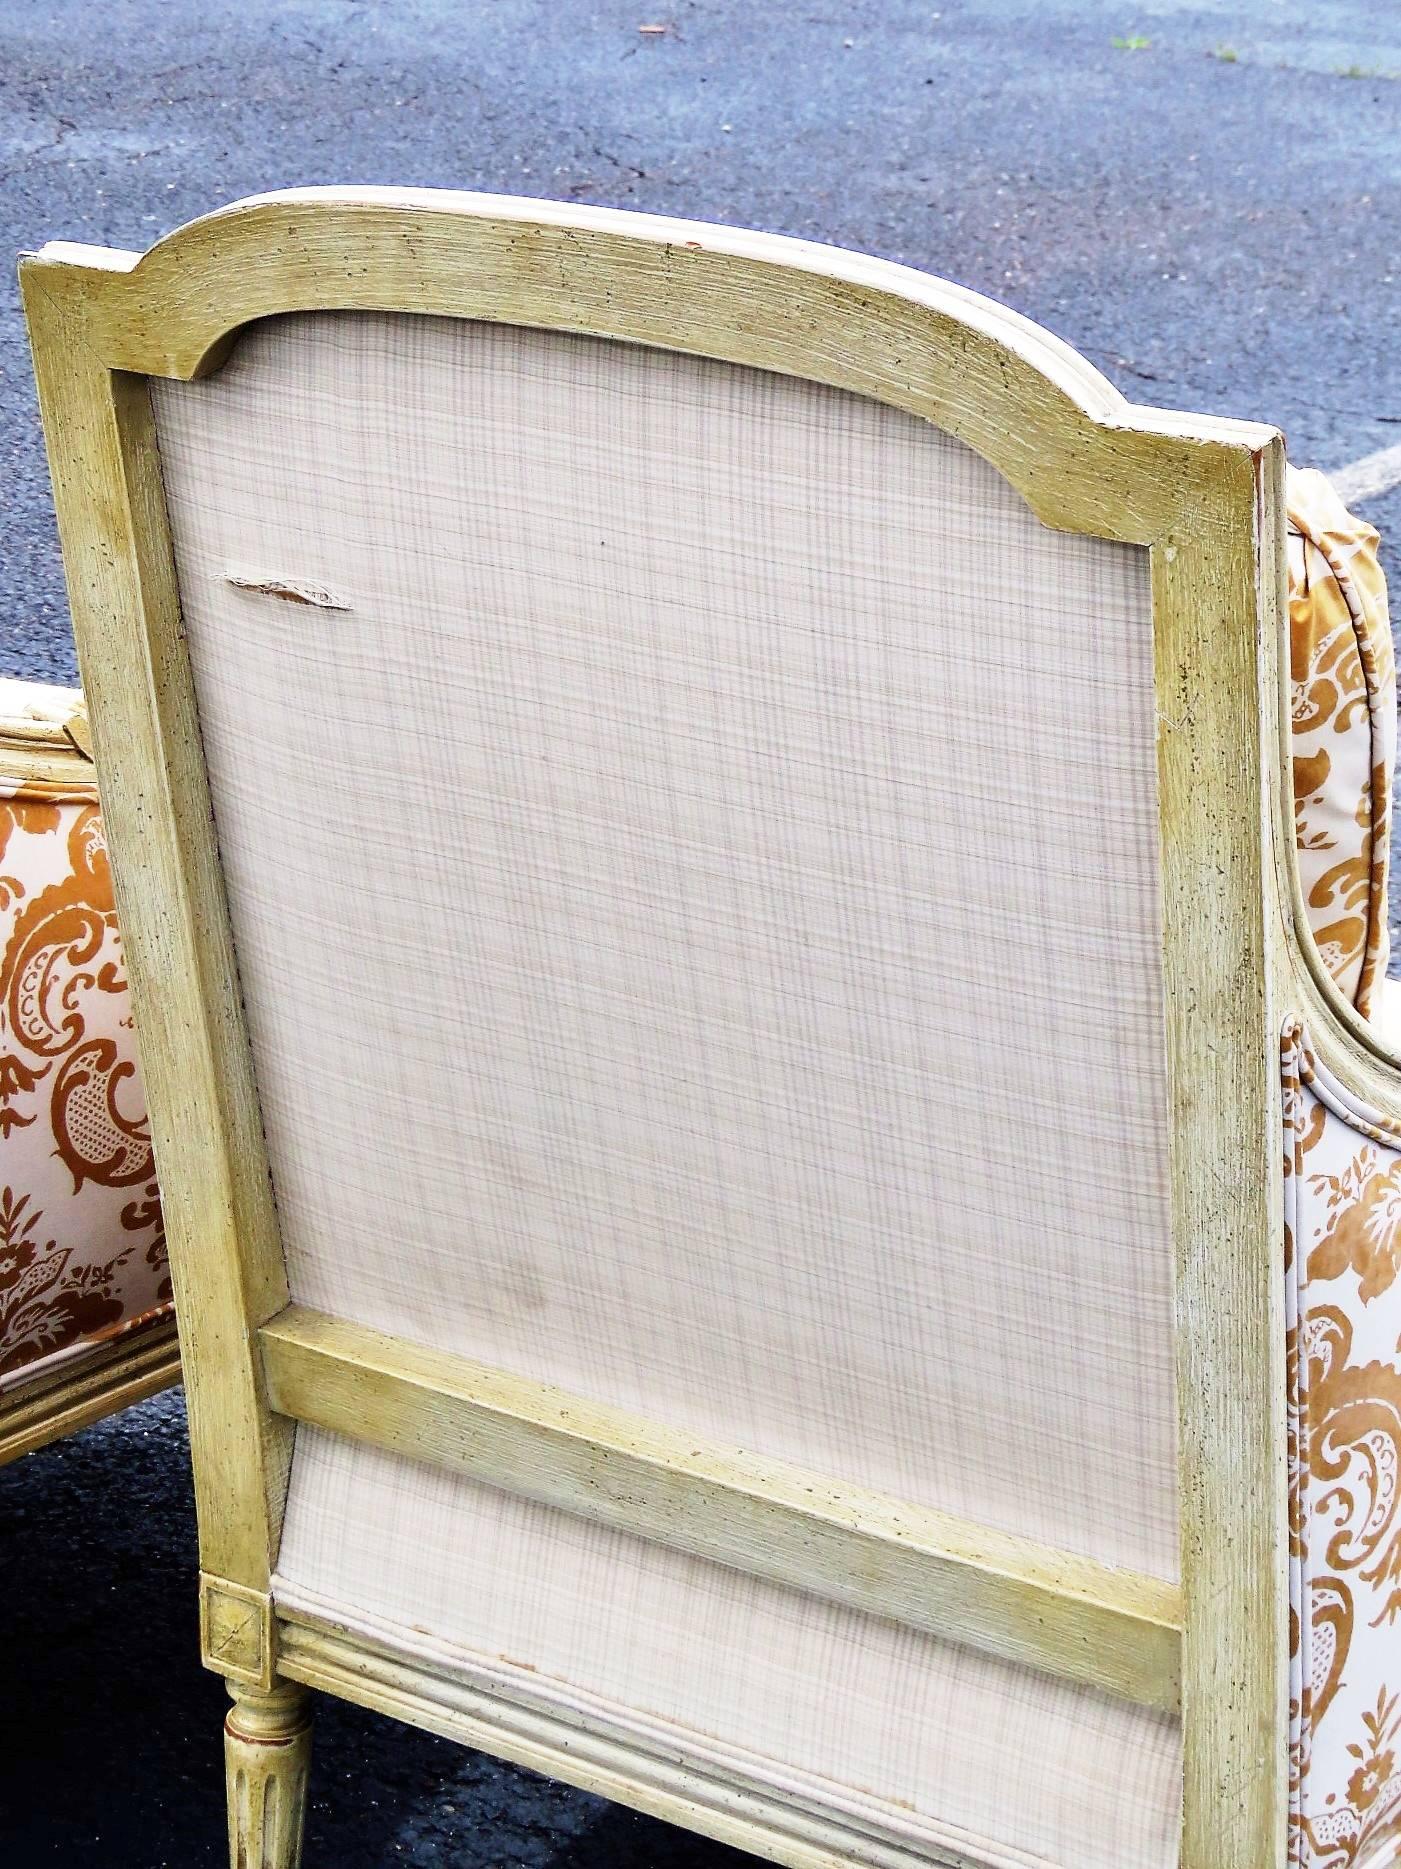 Distressed cream painted carved frames. Yellow and cream damask upholstery.